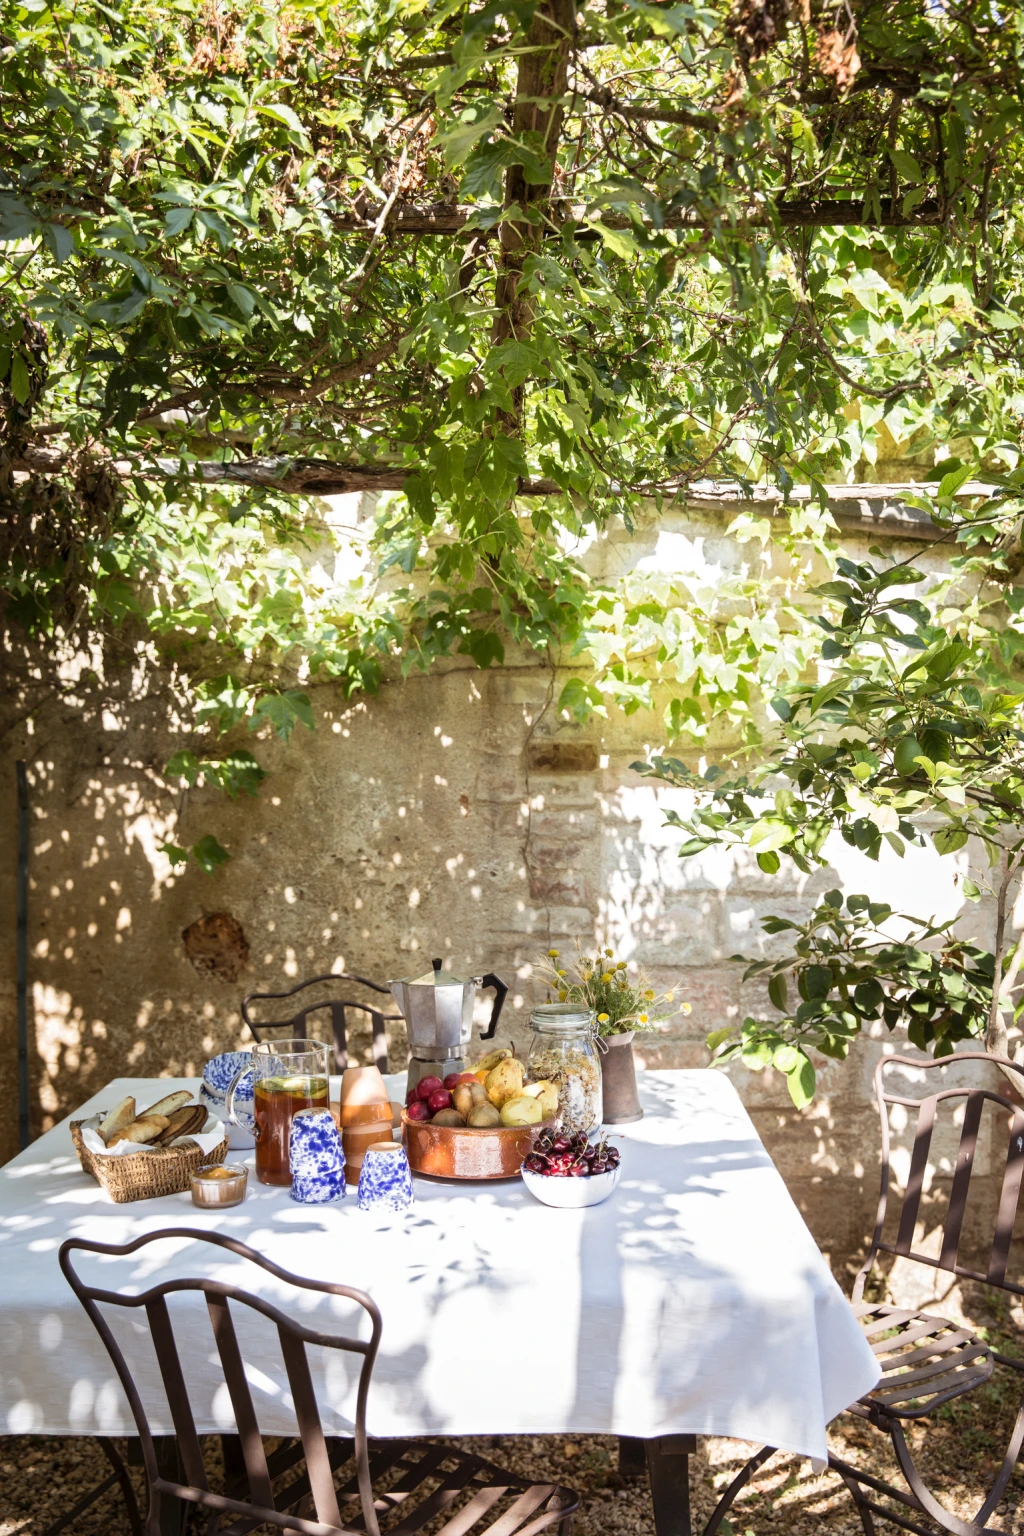 SlowFood in a restored thirteenth century farm in the heart of Tuscany. Connect with nature in a beautifully tranquil spot